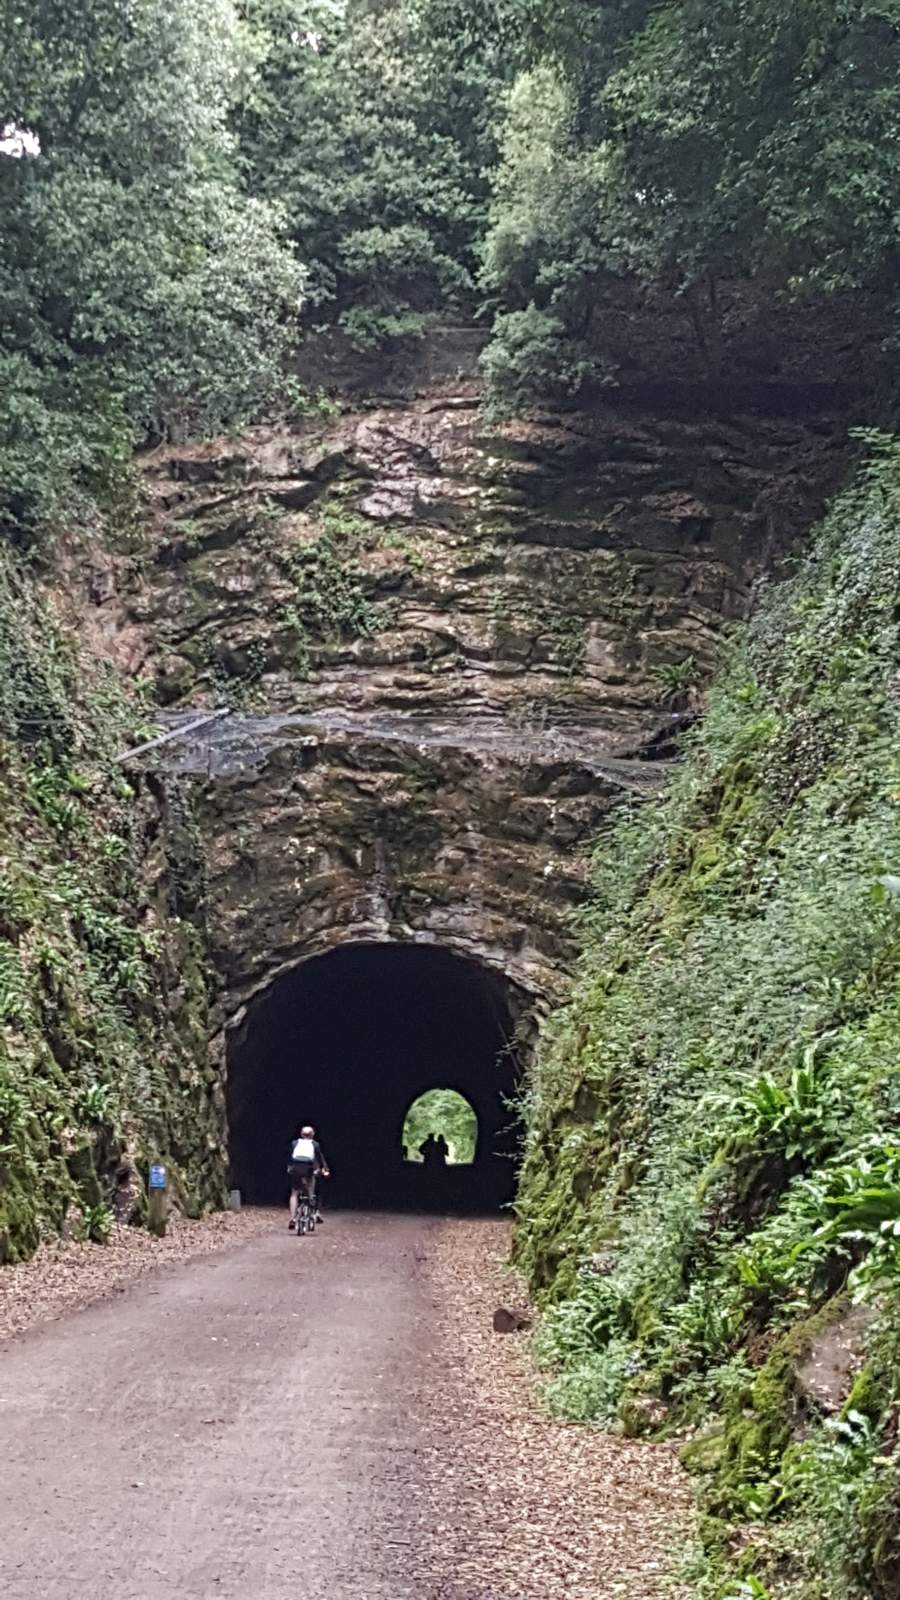 A cyclist riding in to Shute Shelve Tunnel at the South Portal Cyclist